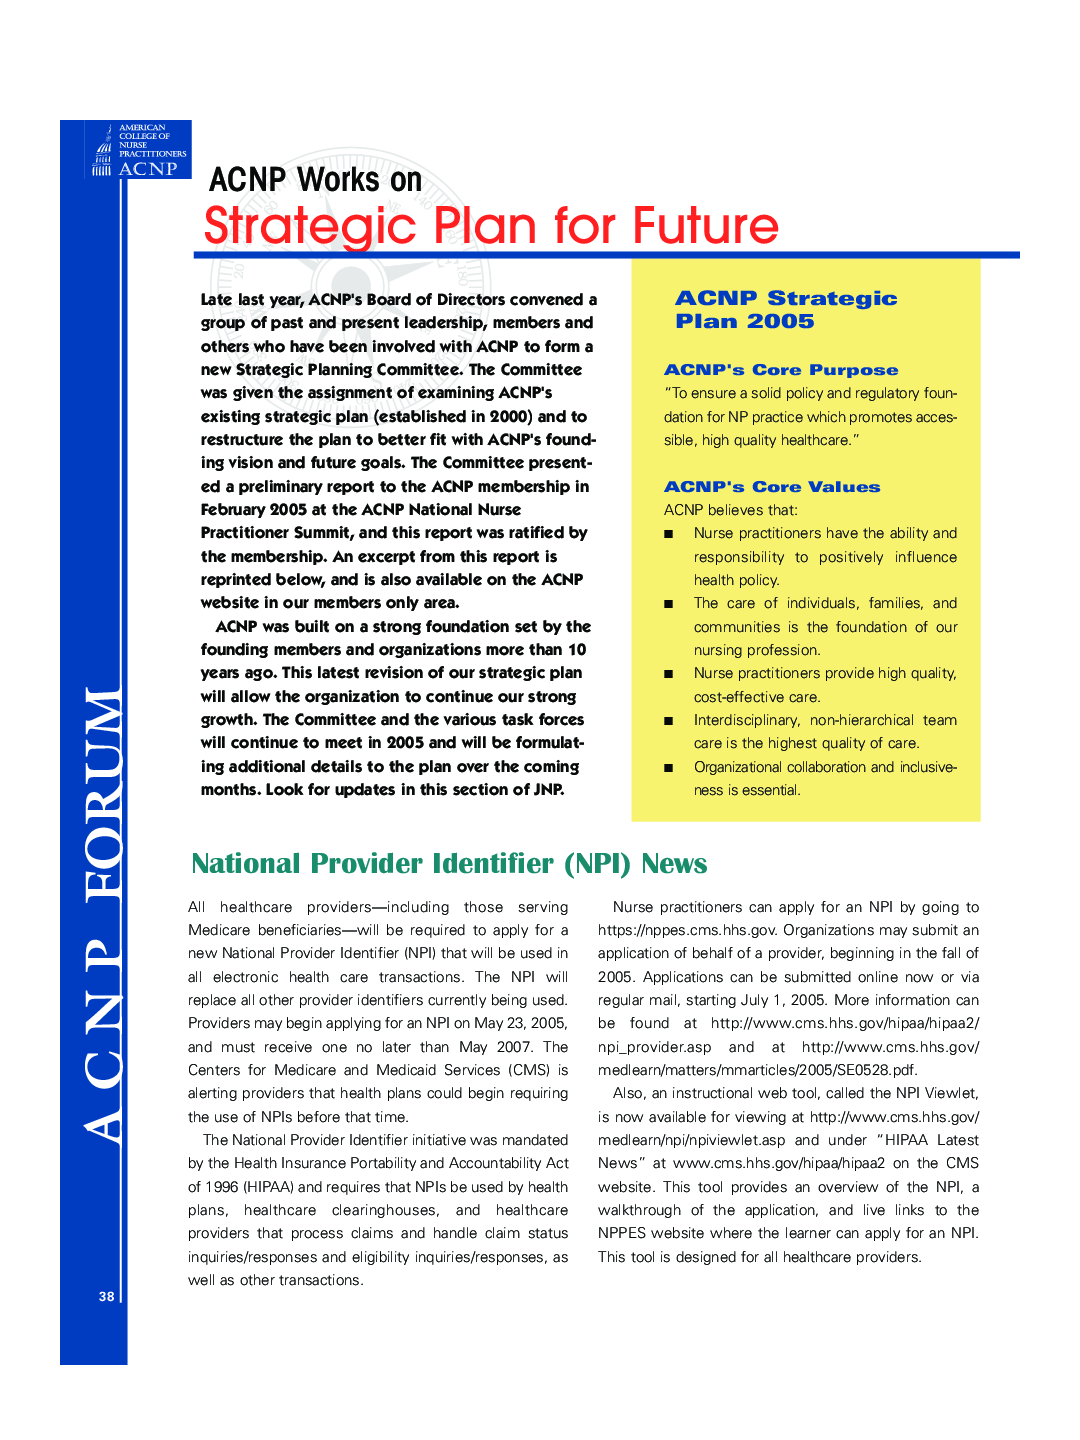 ACNP Works on Strategic Plan for Future